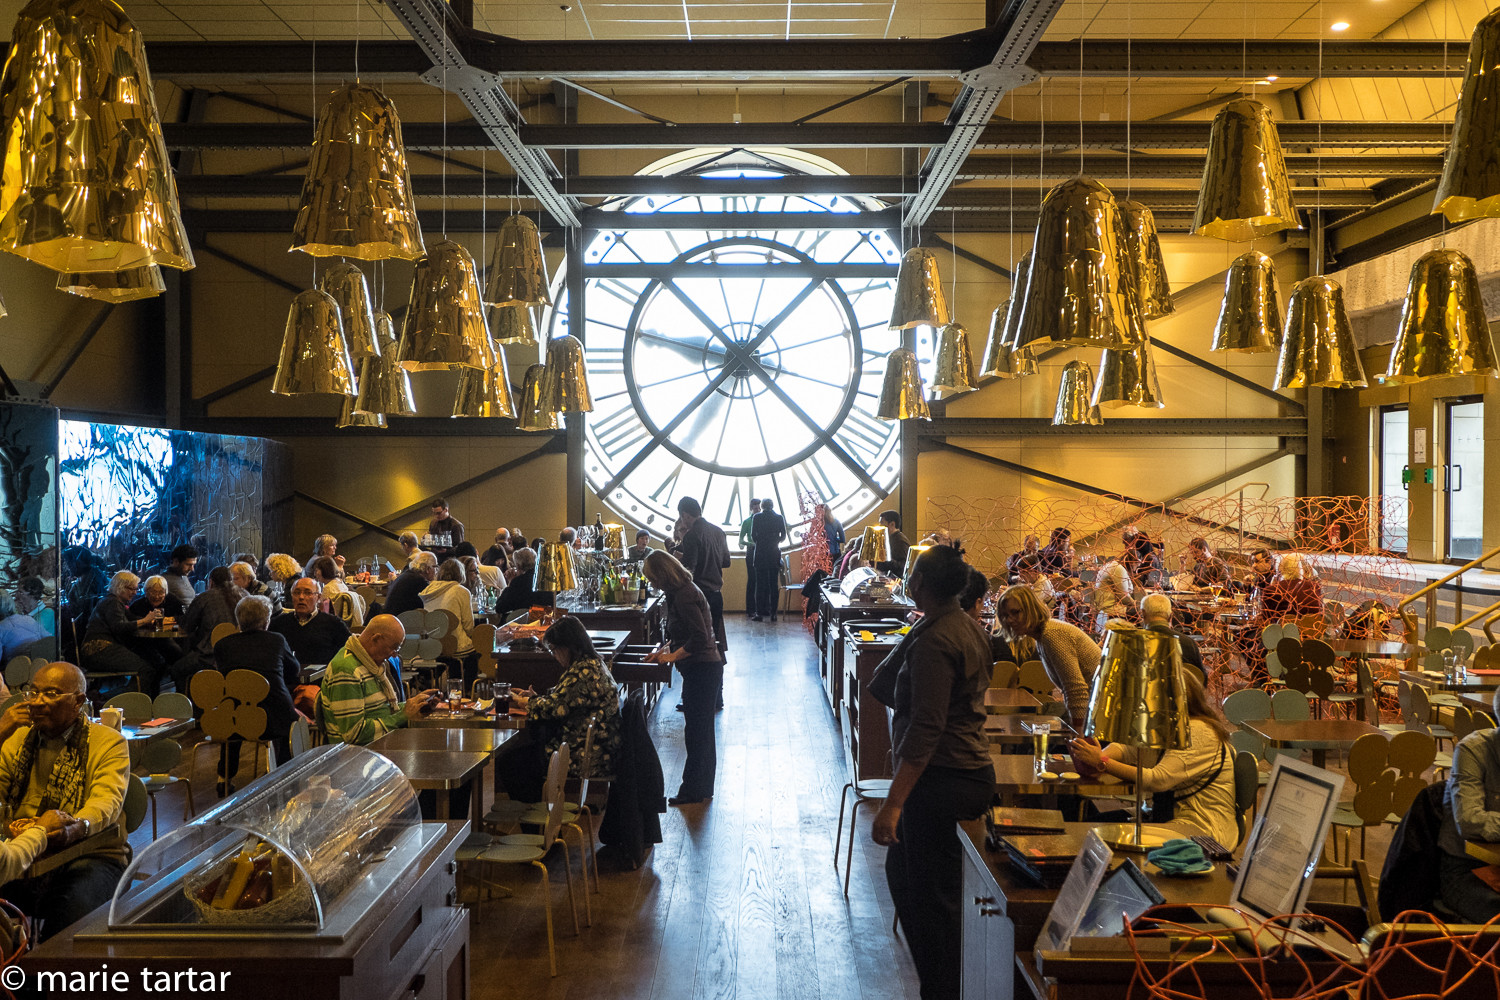 A beautiful new dining option, Café Campana, at musée d'Orsay, by les frêres braziliens, the Campanas